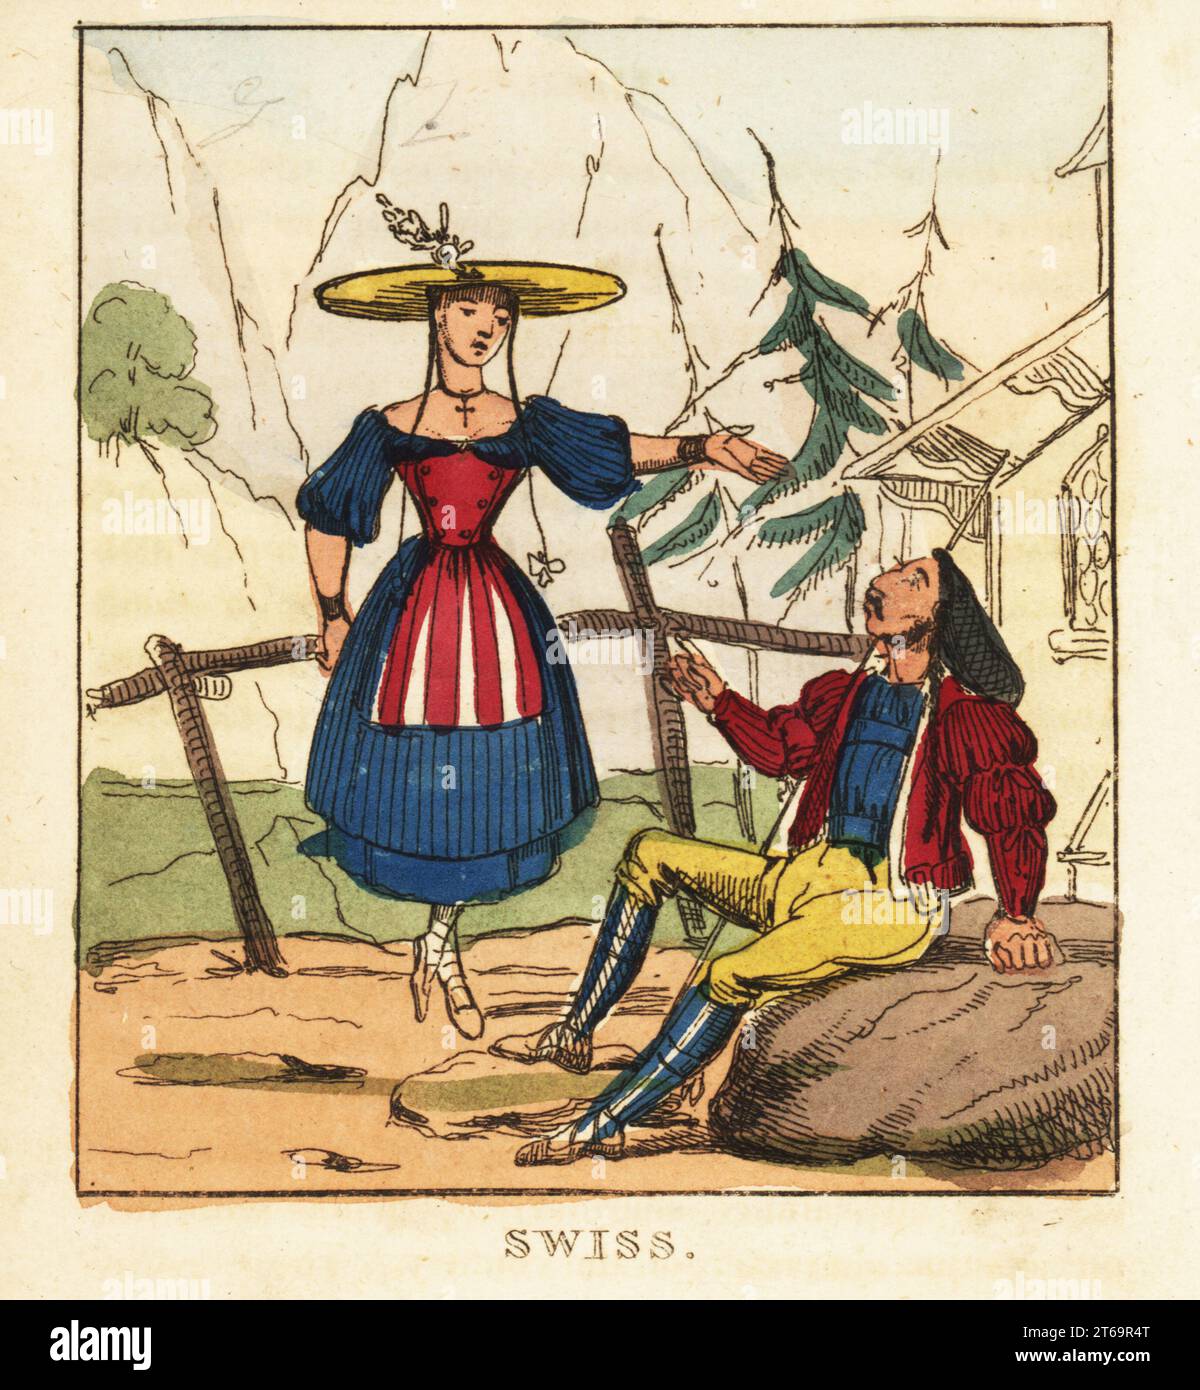 Costumes of the Swiss people, 19th century. Woman in wide-brim hat, pigtails, blouse, bodice, skirts and apron. Man in hat, quilted jacket, breeches and boots. Switzerland. Handcoloured copperplate engraving from The World in Miniature, or Panorama of the Costumes, Manners & Customs of All Nations, John Bysh, London, 1825. Stock Photo